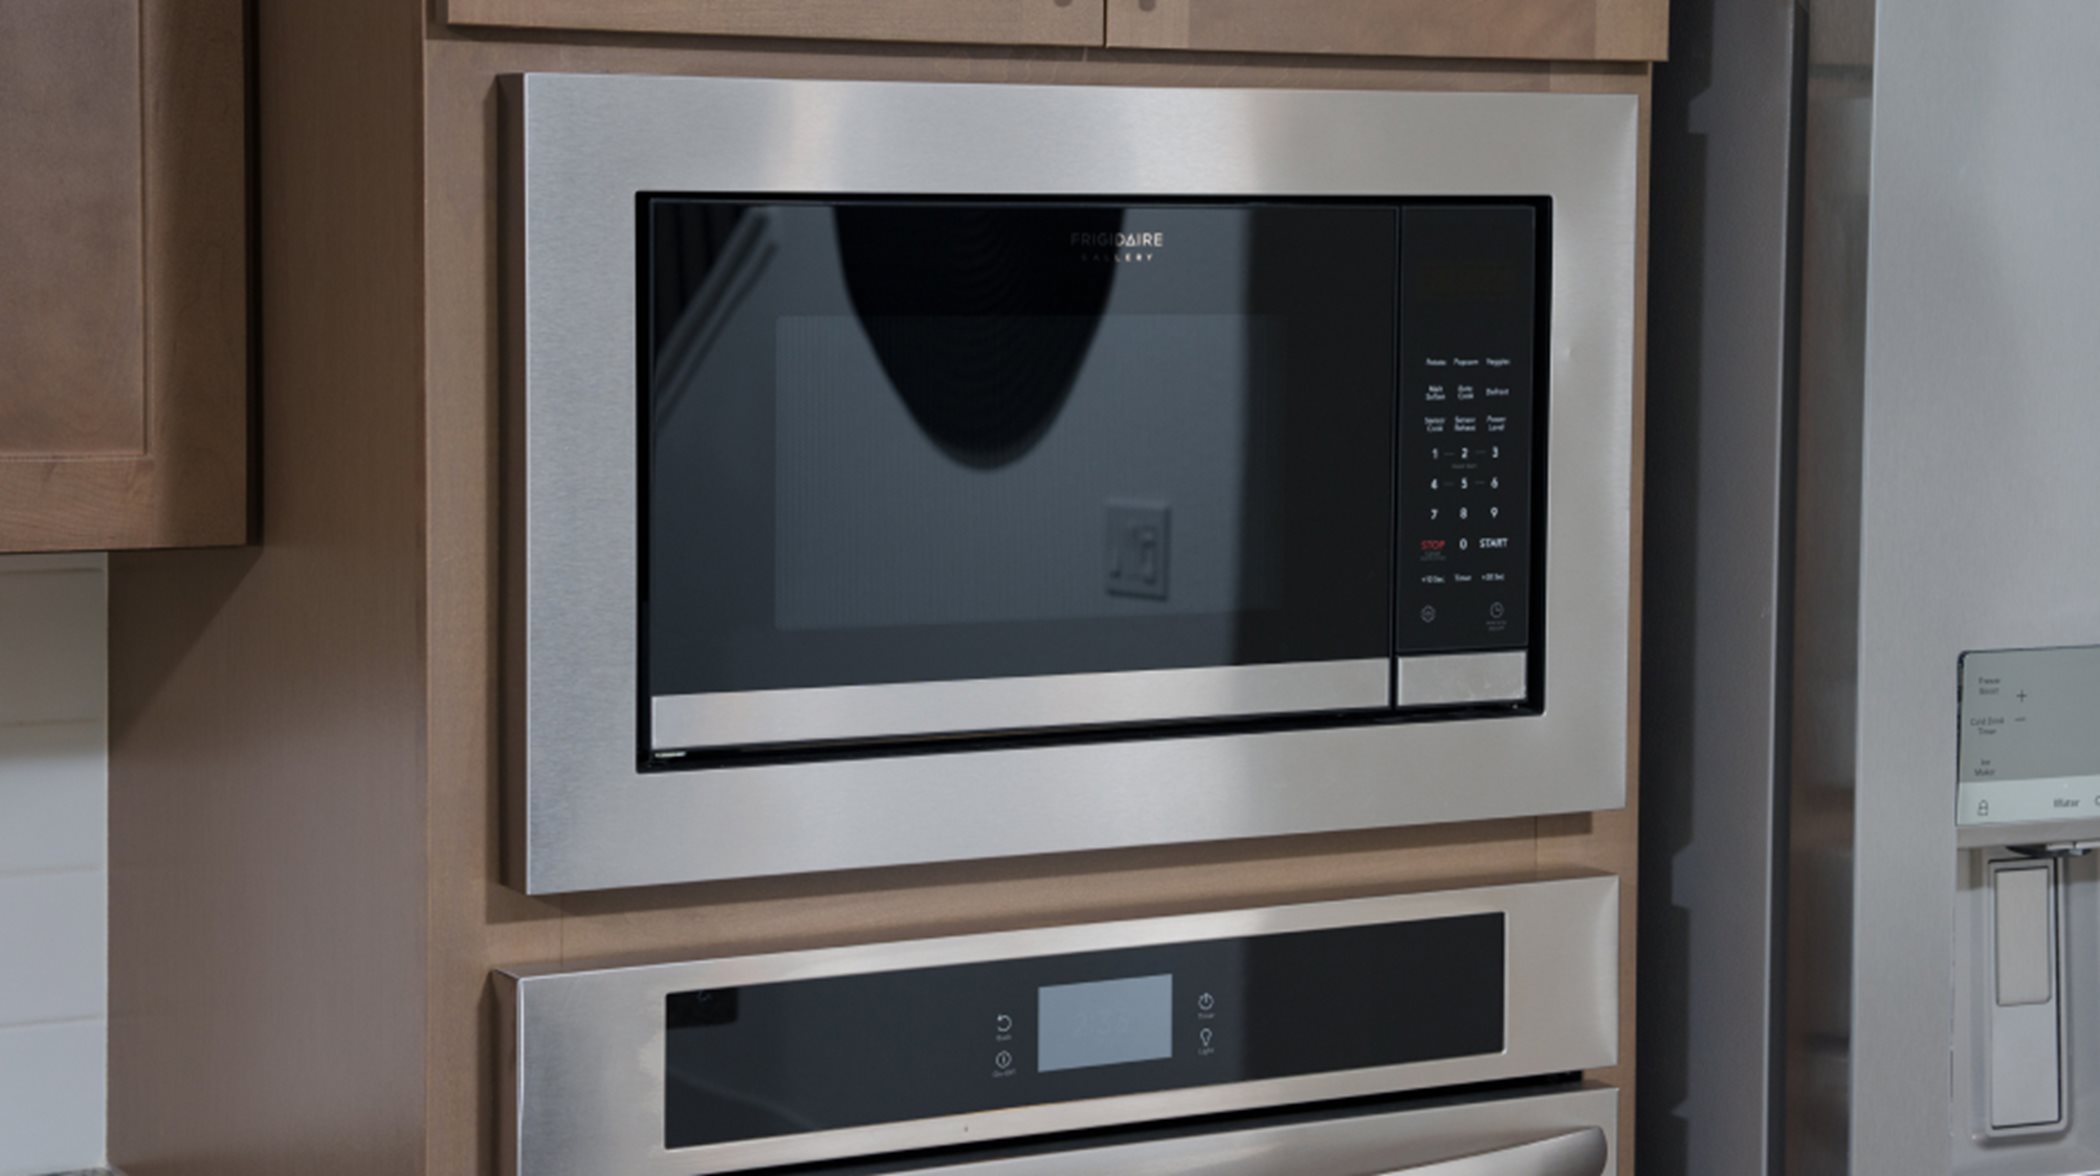 In-wall microwave